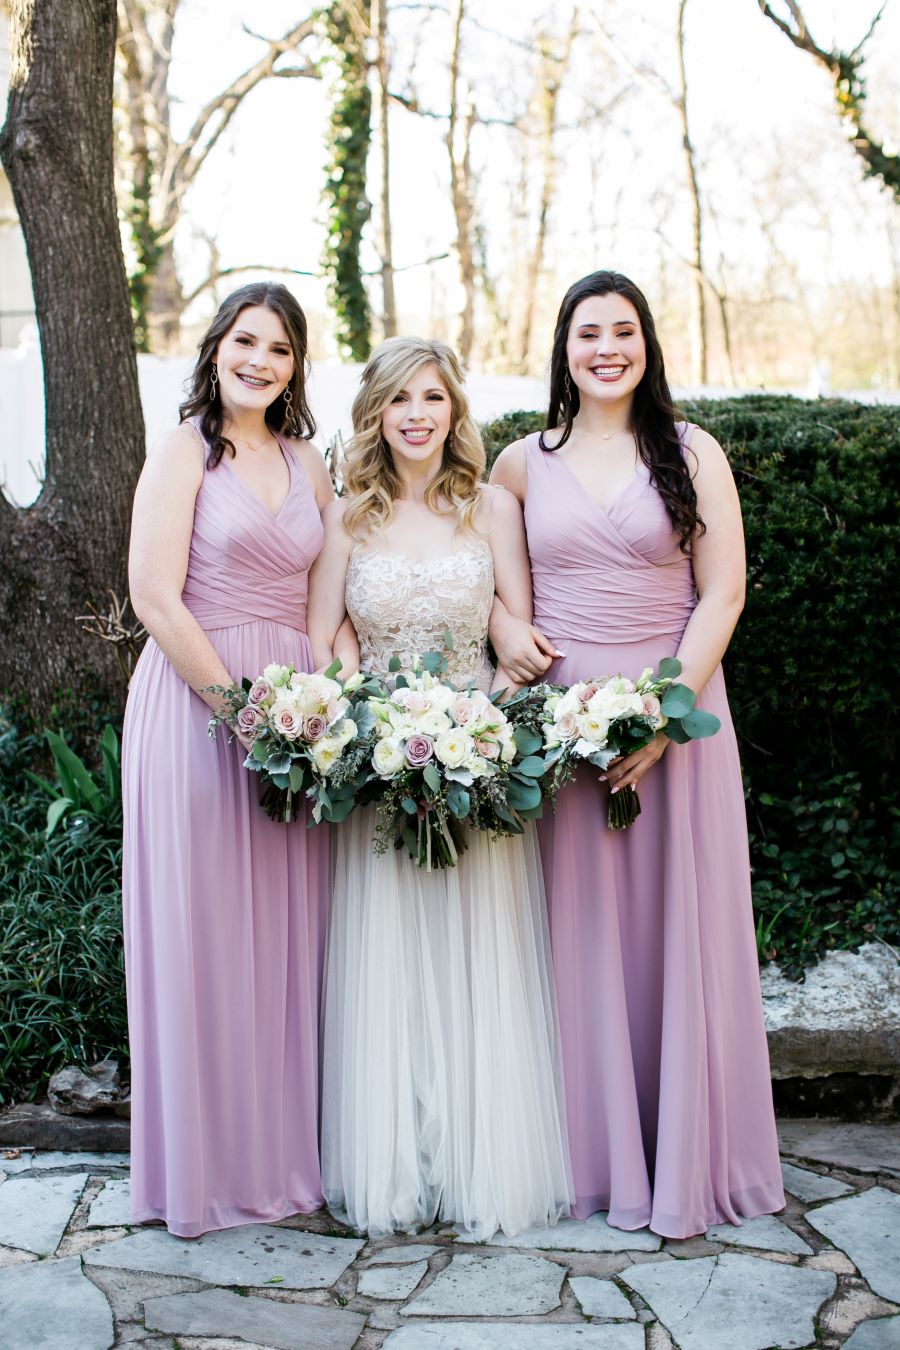 Bride and two bridesmaids in the garden / Elopement / Spring / March / Dusty Rose